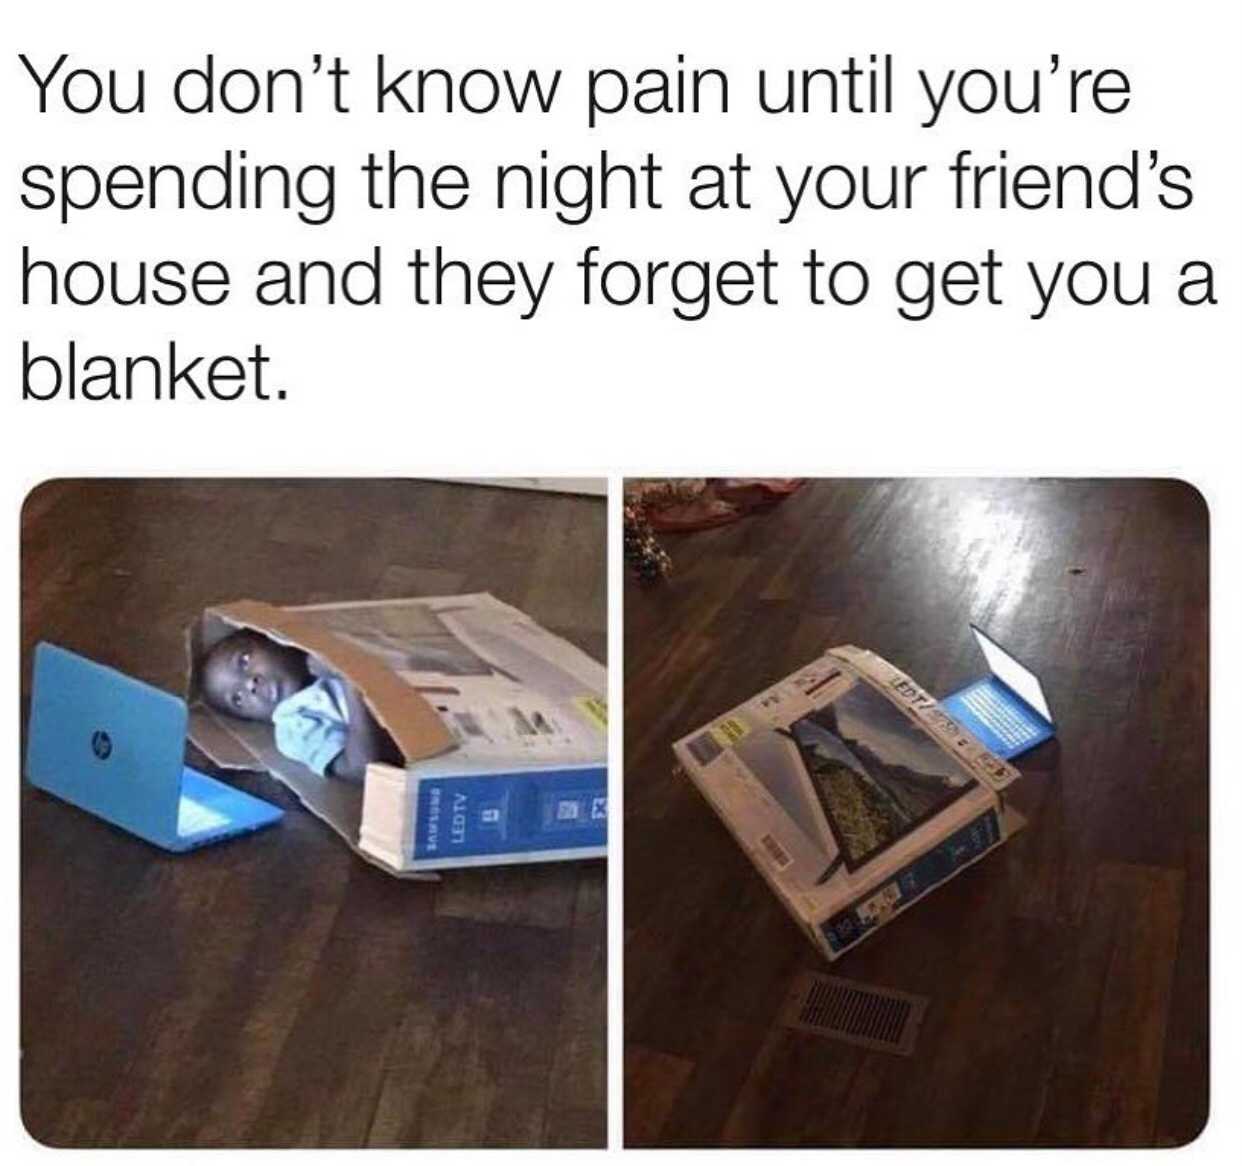 You don't know pain until you're spending the night at your friend's house and they forget to get you a blanket.